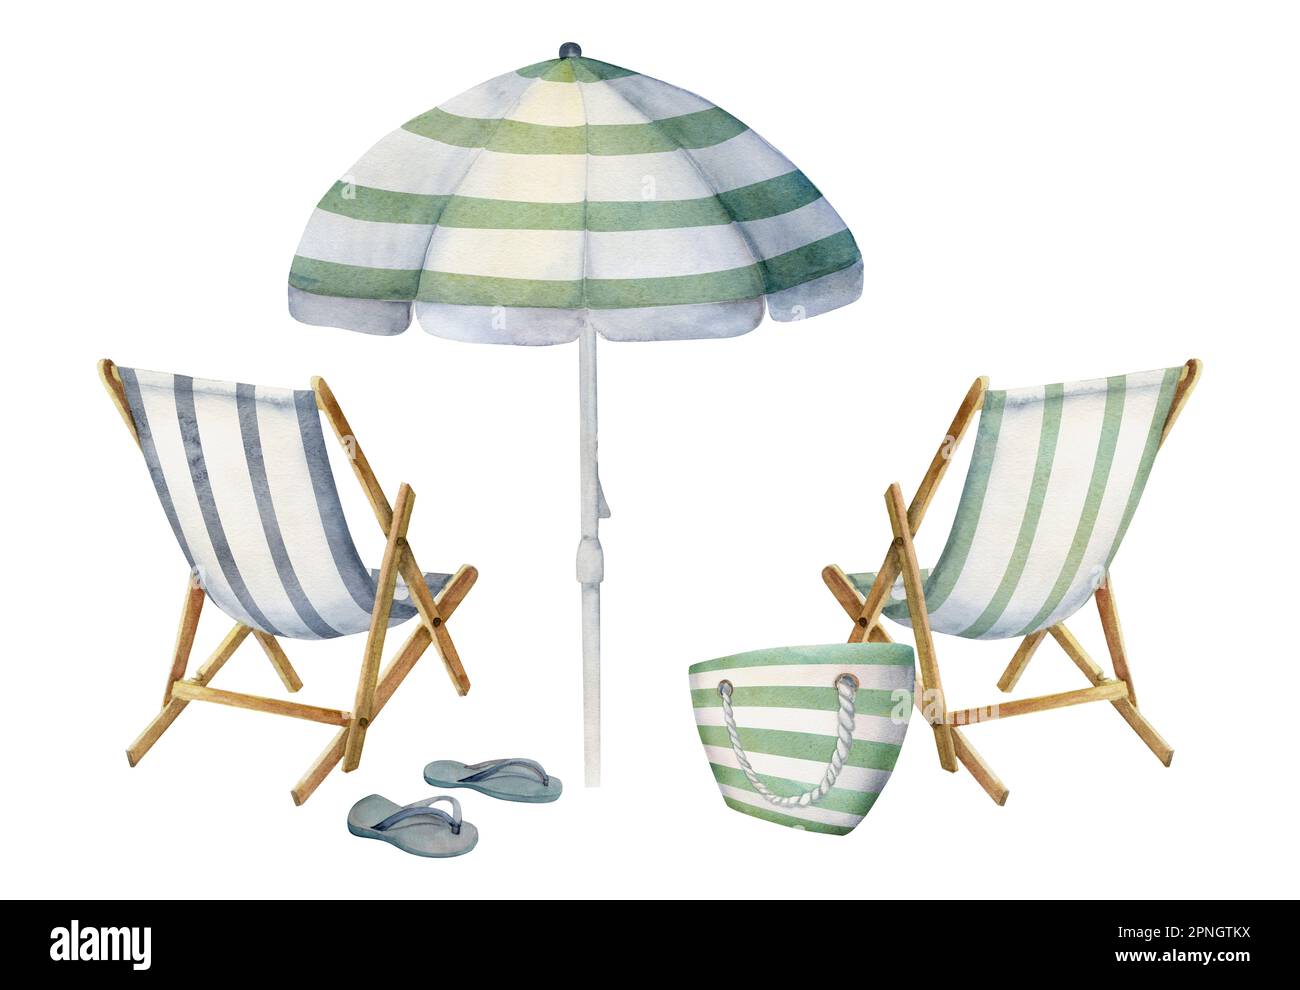 Hand drawn watercolor composition. Striped beach accessories, umbrellas and chairs on sand. Isolated on white background. Design wall art, wedding Stock Photo